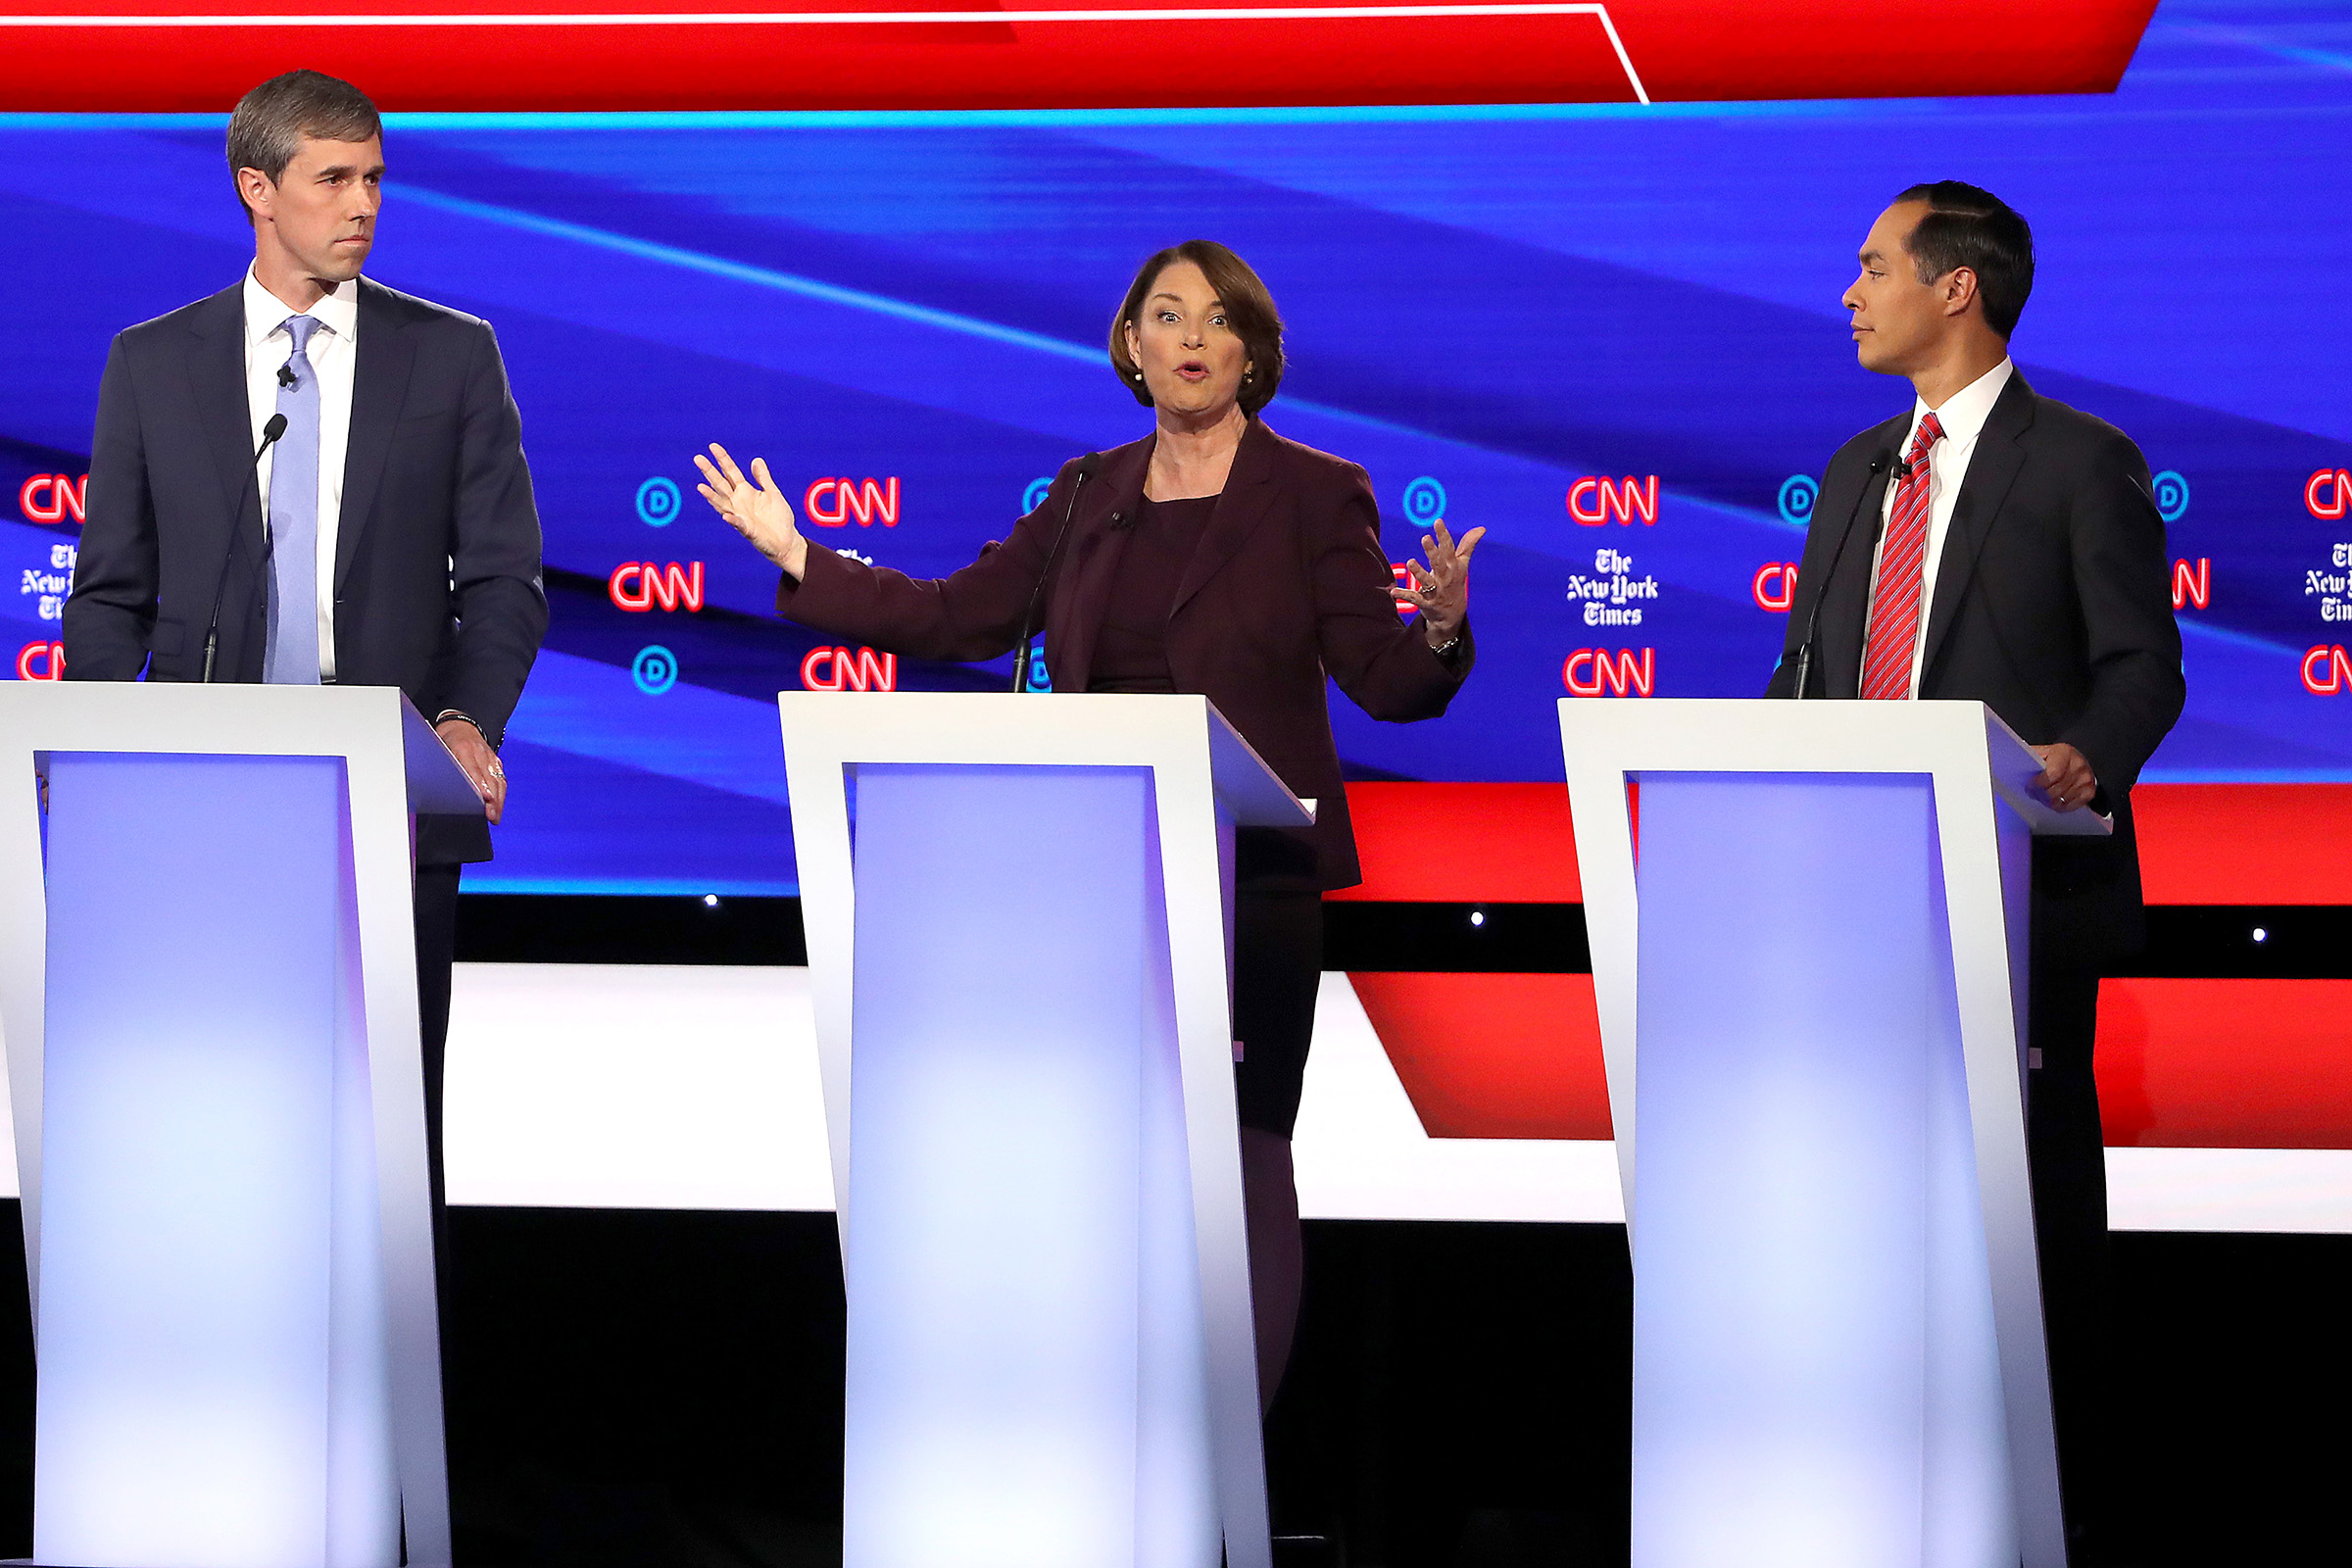 (L-R) Former Texas congressman Beto O'Rourke, Sen. Amy Klobuchar (D-MN) and former housing secretary Julian Castro participate in the Democratic Presidential Debate at Otterbein University on Oct. 15, 2019 in Westerville, Ohio. (Win McNamee—Getty Images)